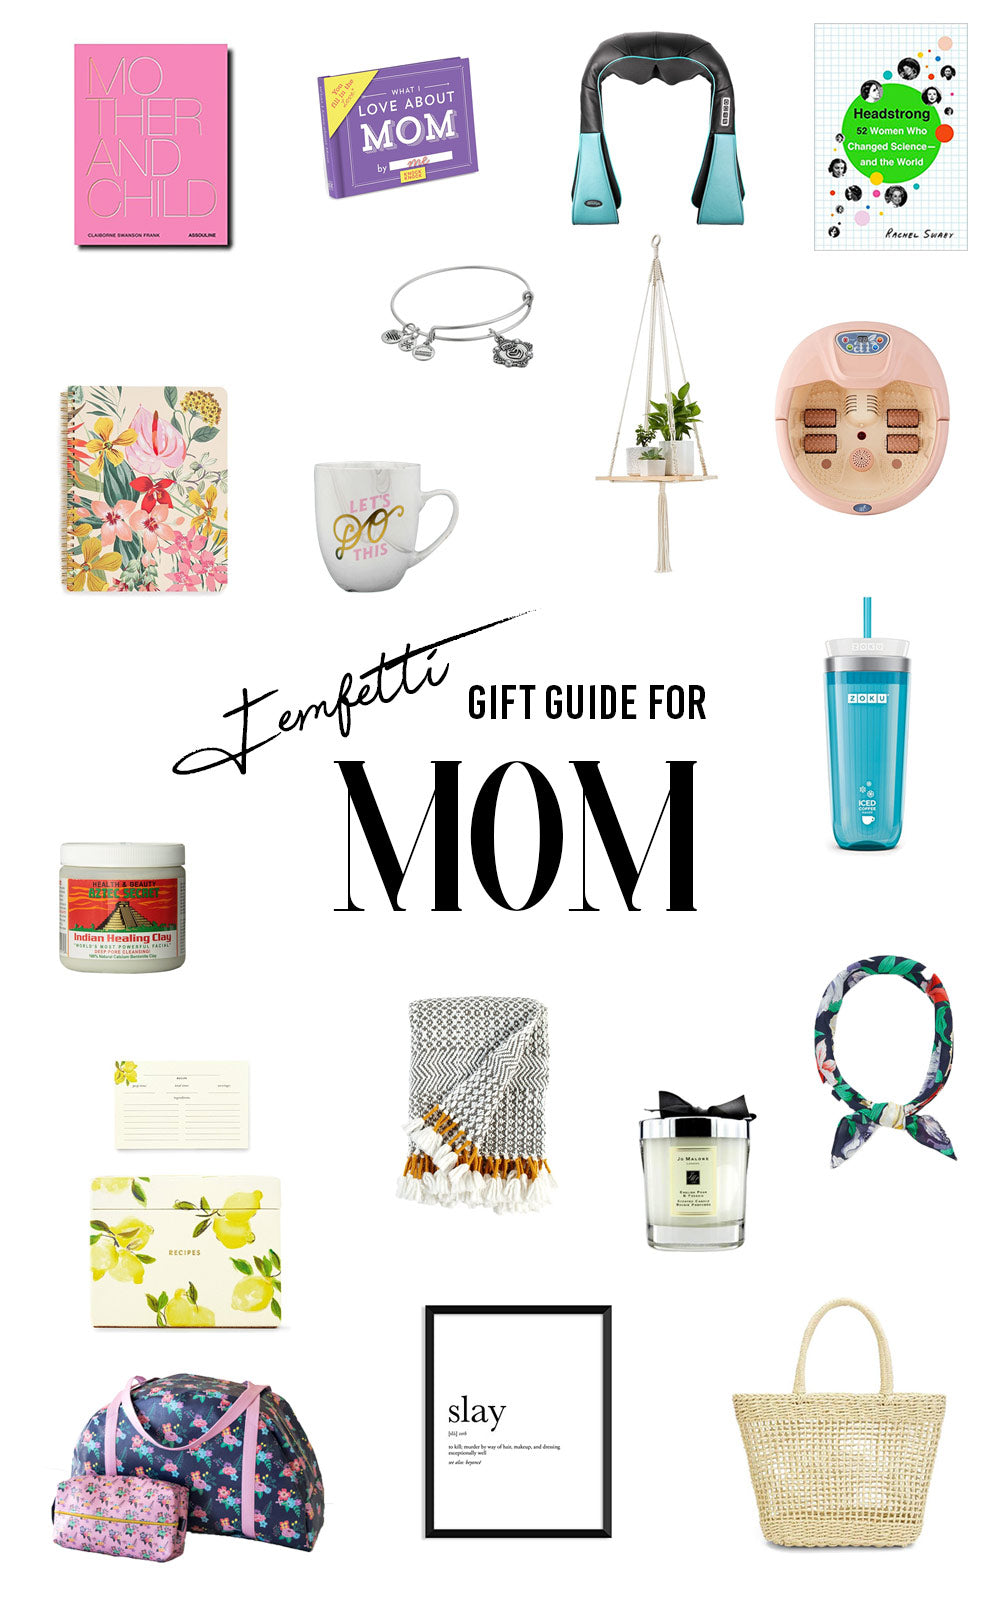 Mother's Day Gift Guide 2018